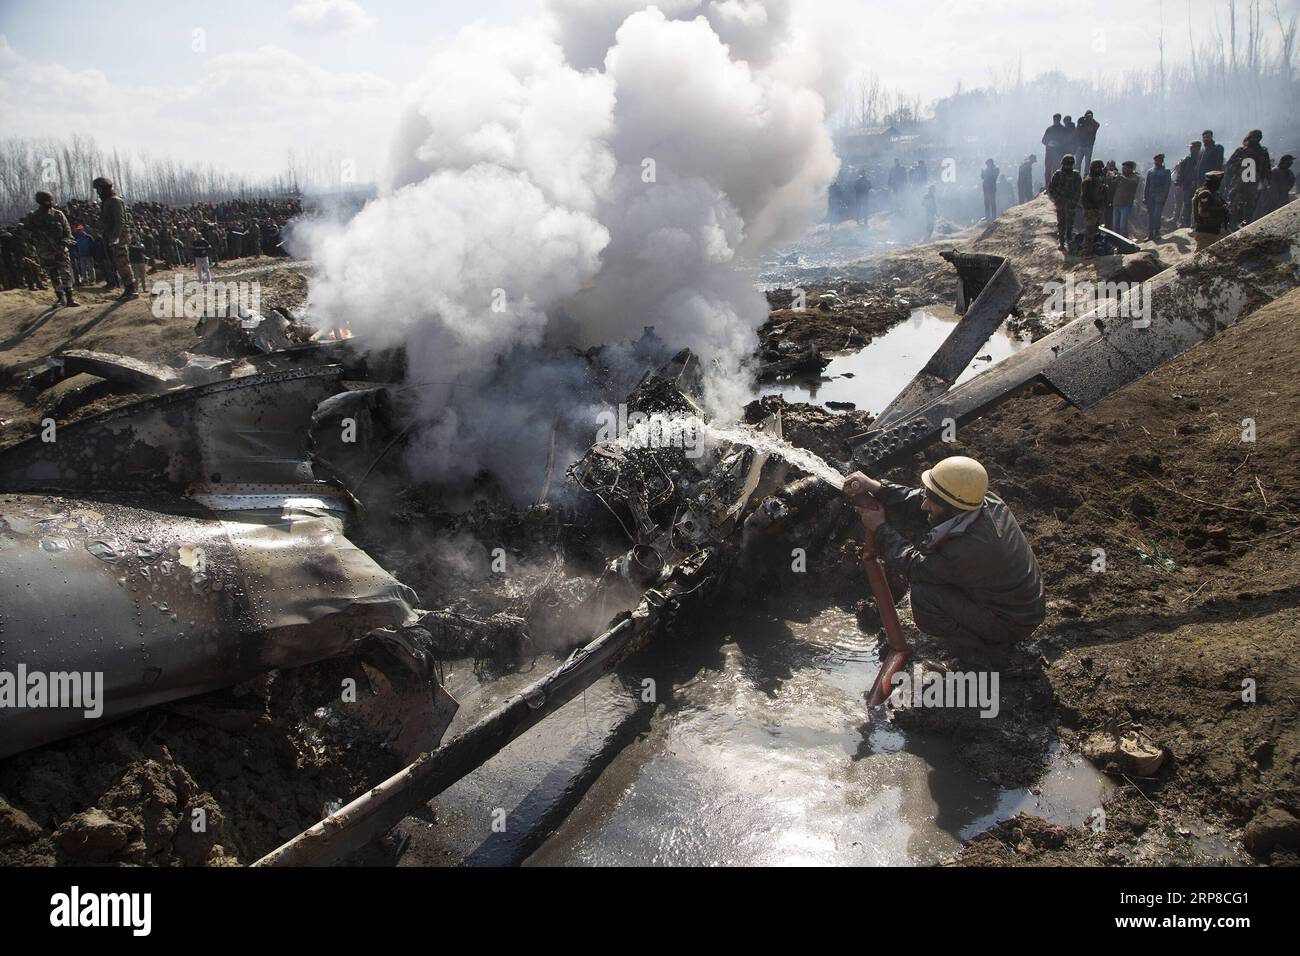 (190227) -- SRINAGAR, Feb. 27, 2019 -- A fire fighter douses the wreckage of an Indian aircraft after it crashed at village Garend Kalan of Budgam, about 34 km south of Srinagar city, the summer capital of Indian-controlled Kashmir, Feb. 27, 2019. A pilot and a co-pilot of Indian Air Force (IAF) were killed after a Mi-17 jet crashed Wednesday in Indian-controlled Kashmir, Indian officials said. Meanwhile, Pakistan army said on Wednesday the Pakistan Air Force has shot down two Indian fighter jets inside Pakistani airspace and ground troops arrested one pilot of the destroyed jet, according to Stock Photo